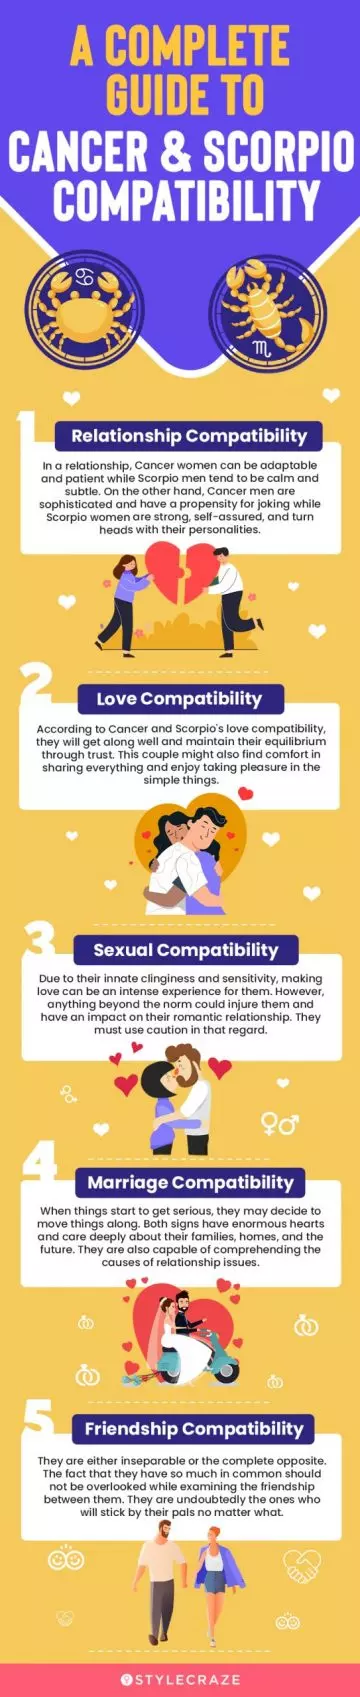 a complete guide to the cancer and scorpio compatibility (infographic)